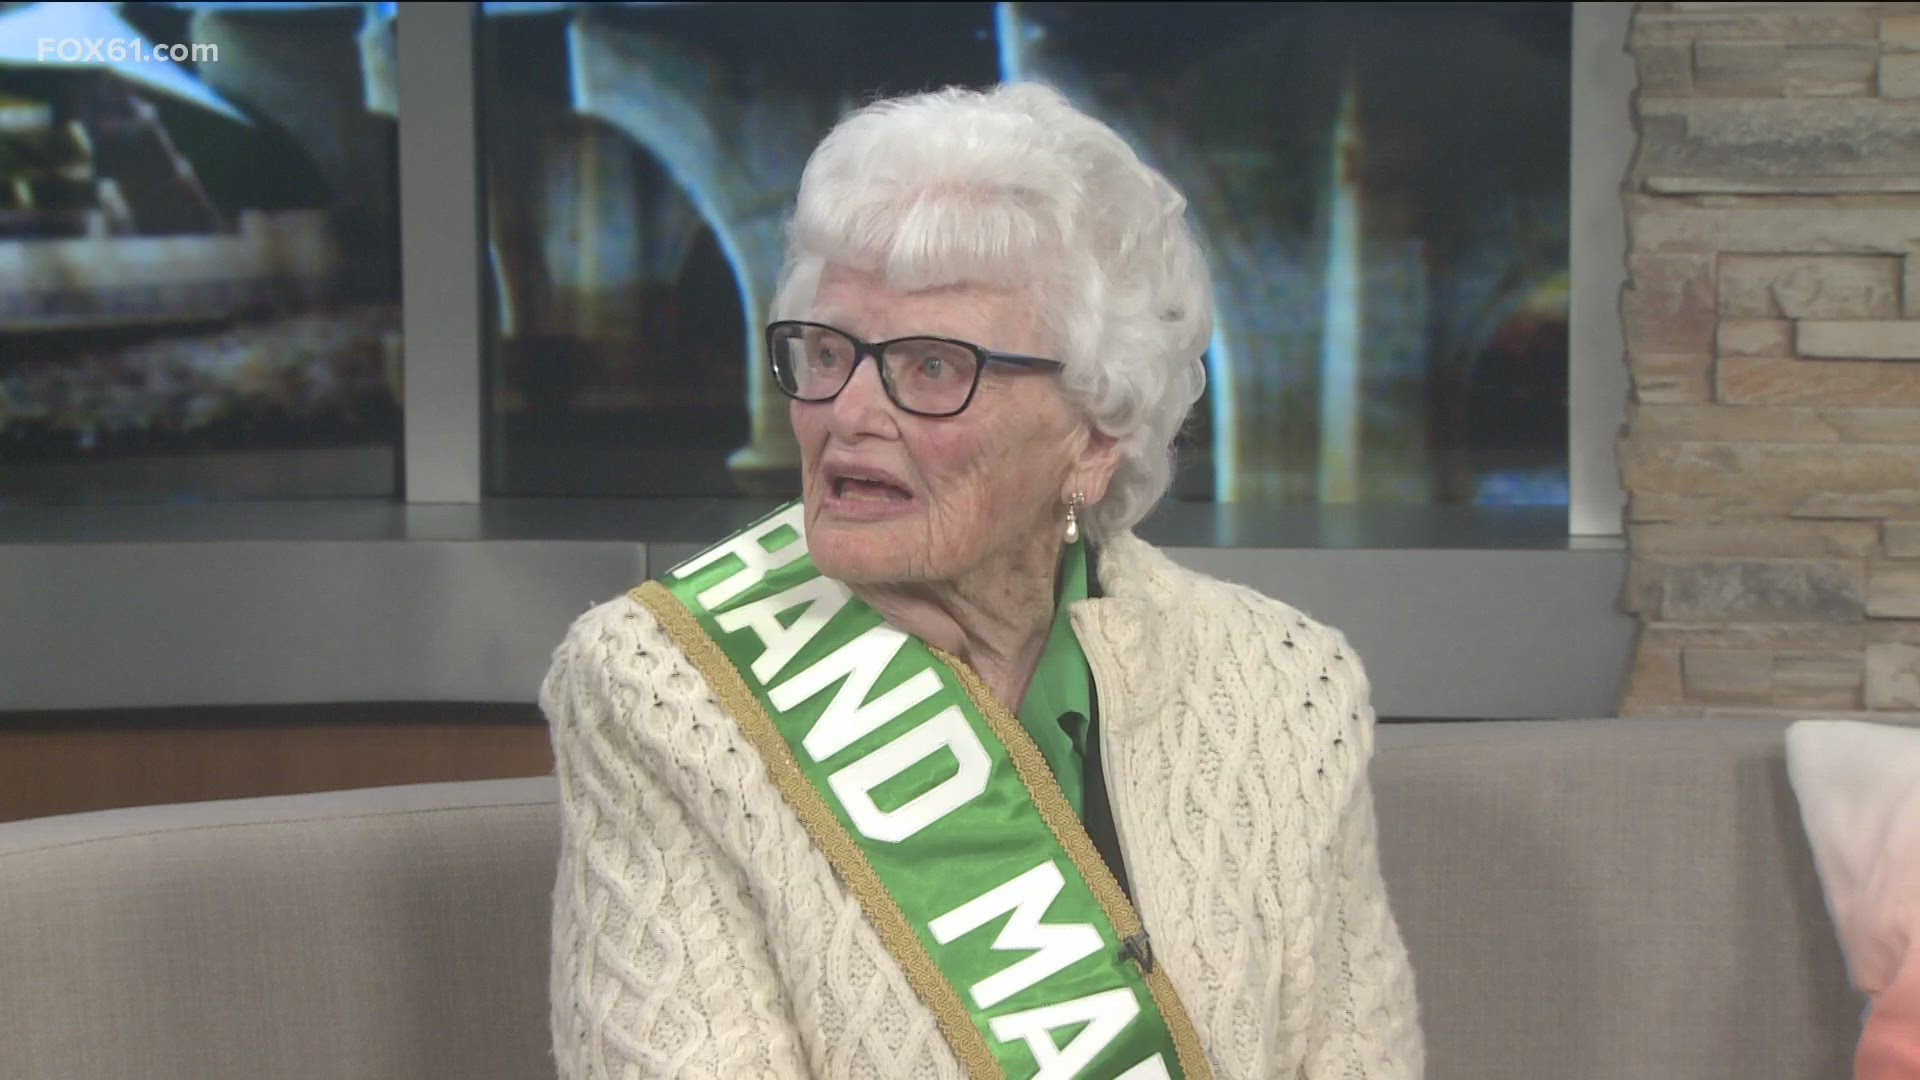 Elizabeth "Betty" Mohan is the Grand Marshal for the 2023 Greater Hartford St. Patrick's Day Parade.